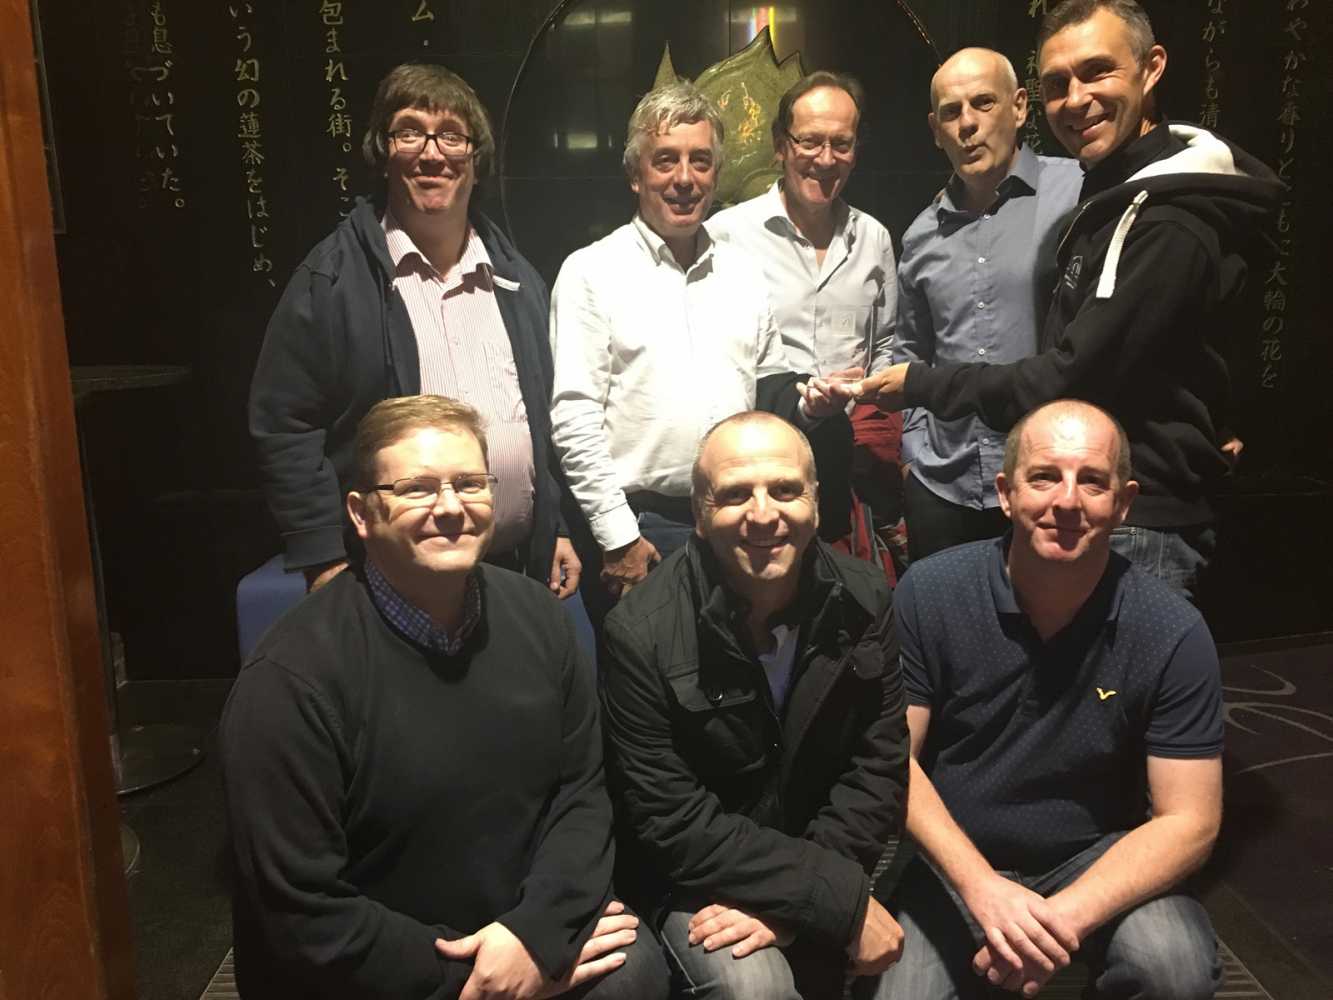 The Rea Sound team, with Martin Audio’s EMEA sales manager, Bradley Watson